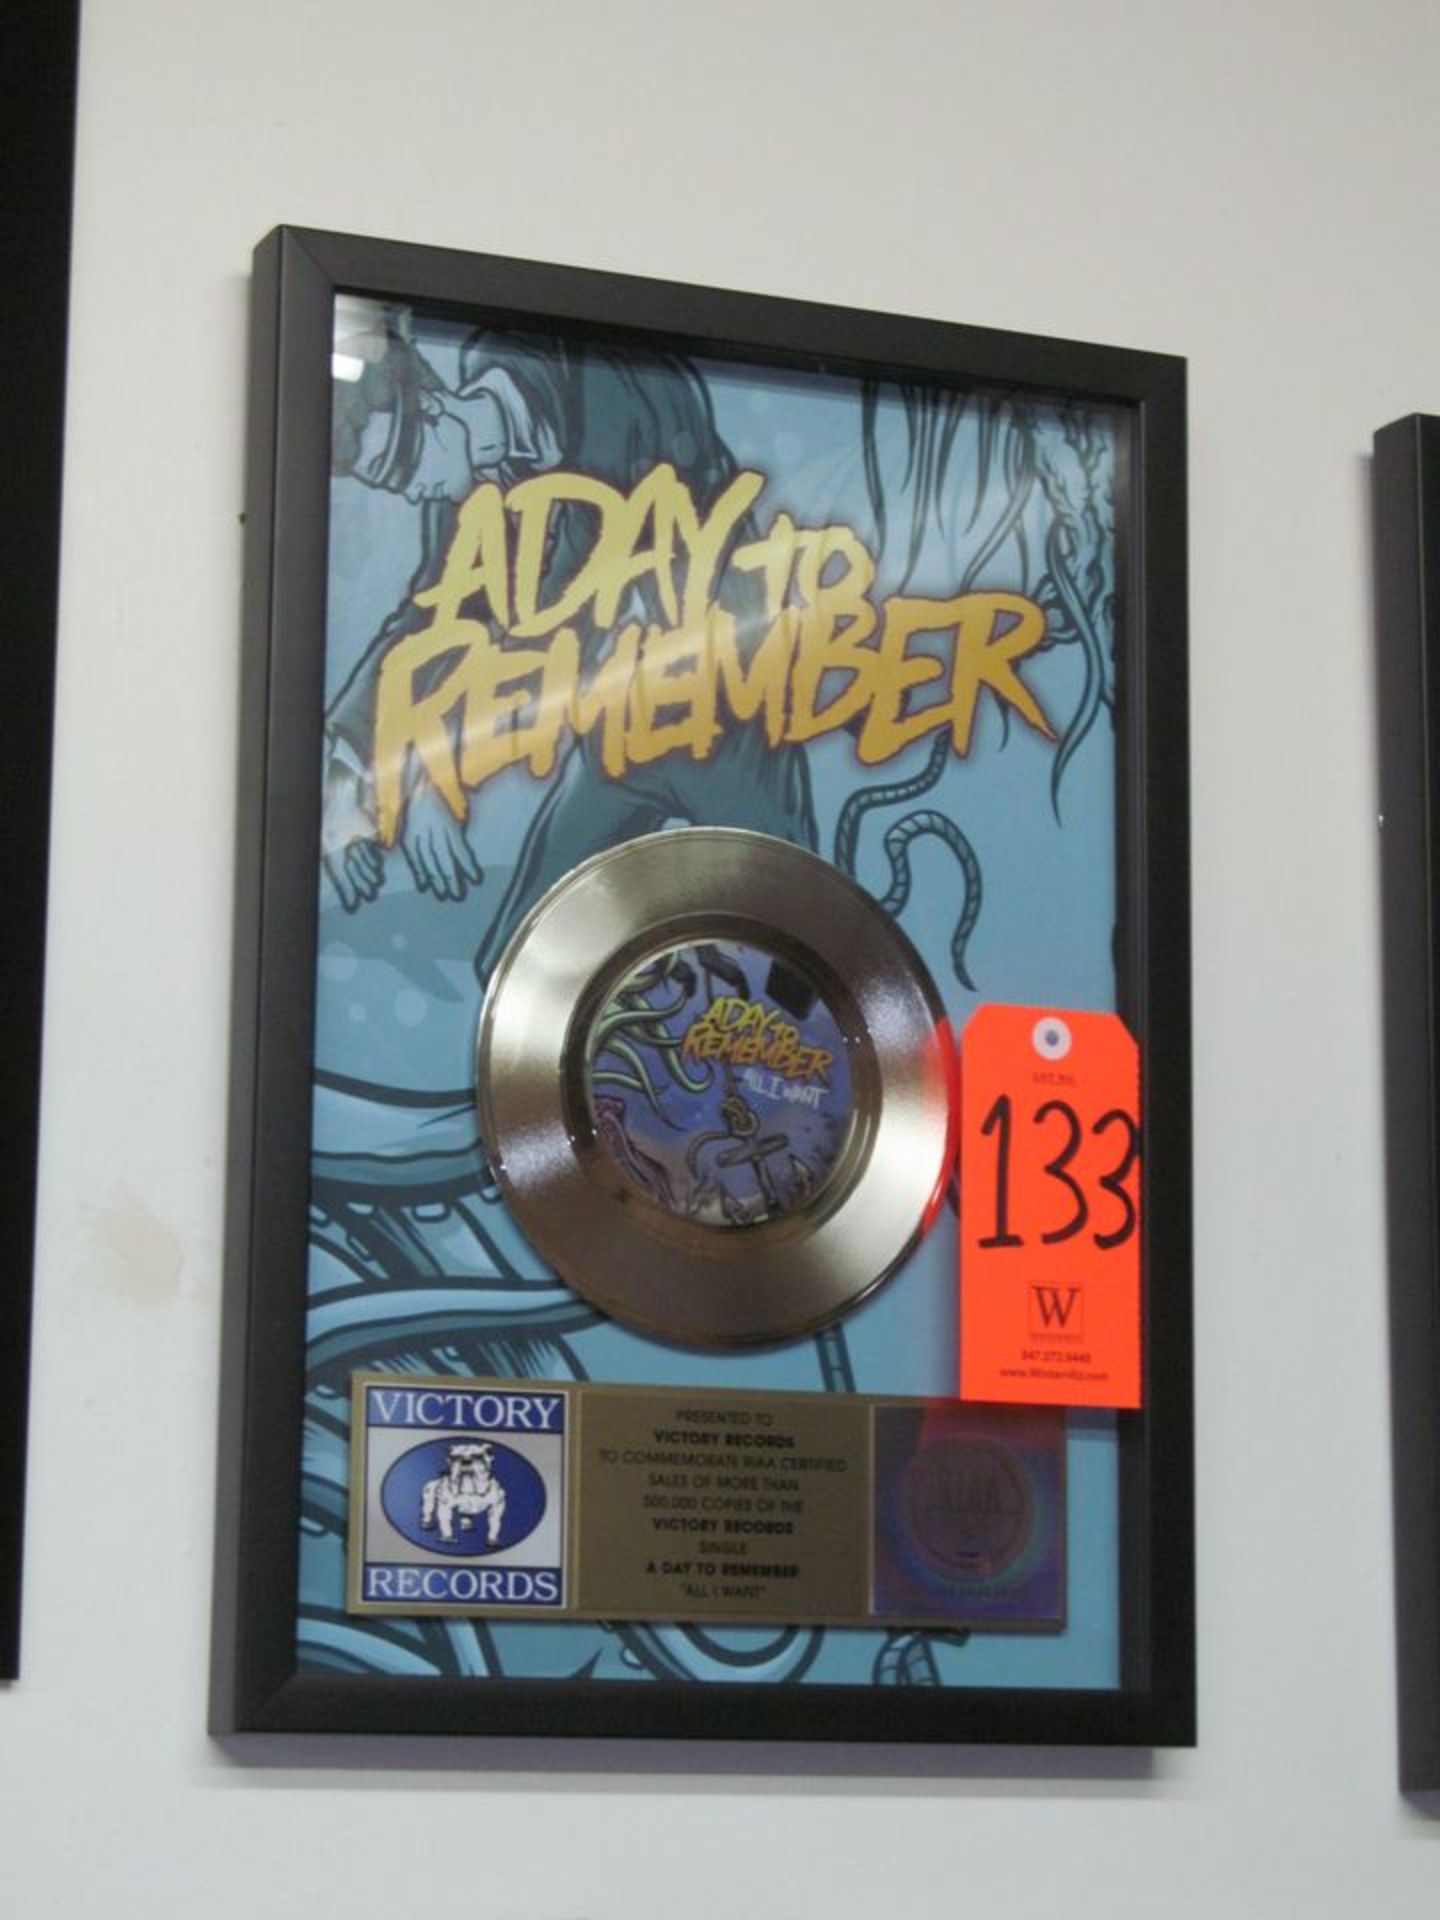 RIAA Certified Gold Record for the Single "All I Want" by A Day To Remember, to Commemorate Sales of